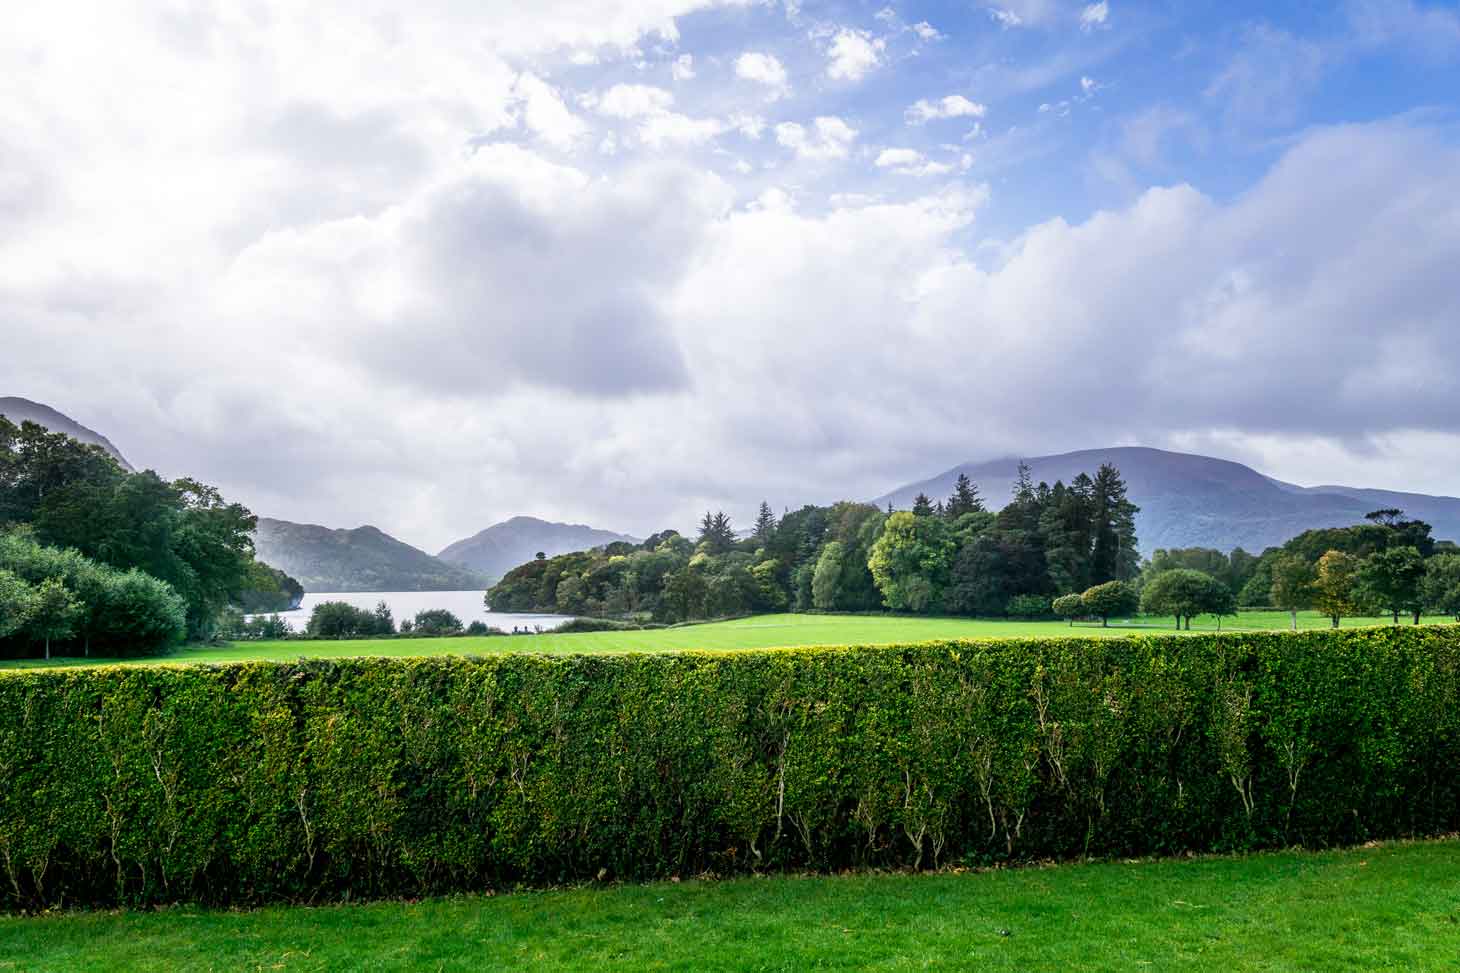 Muckross Lake is one of the 3 Lakes of Killarney